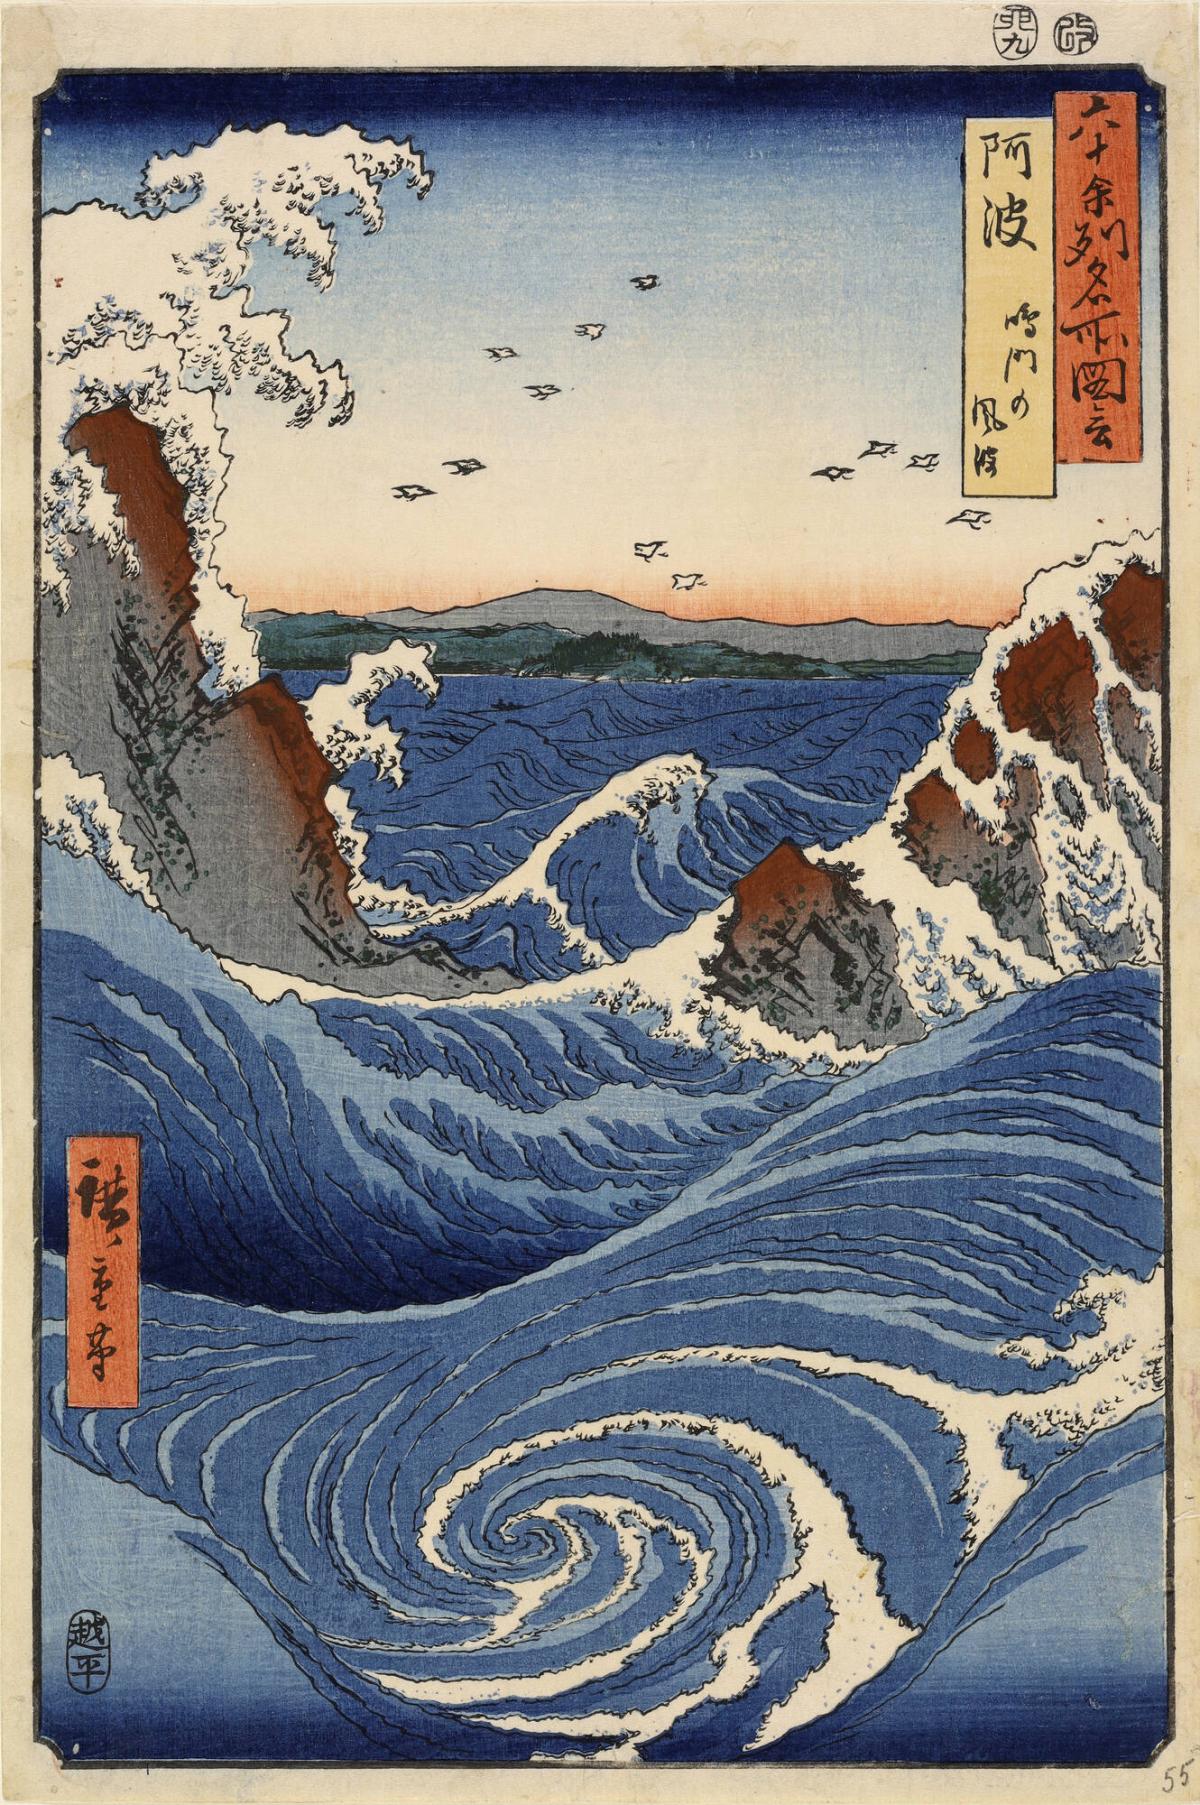 Whirlpool and Waves at Naruto in Awa Province, no. 55 from the series Pictures of Famous Places in the Sixty-odd Provinces